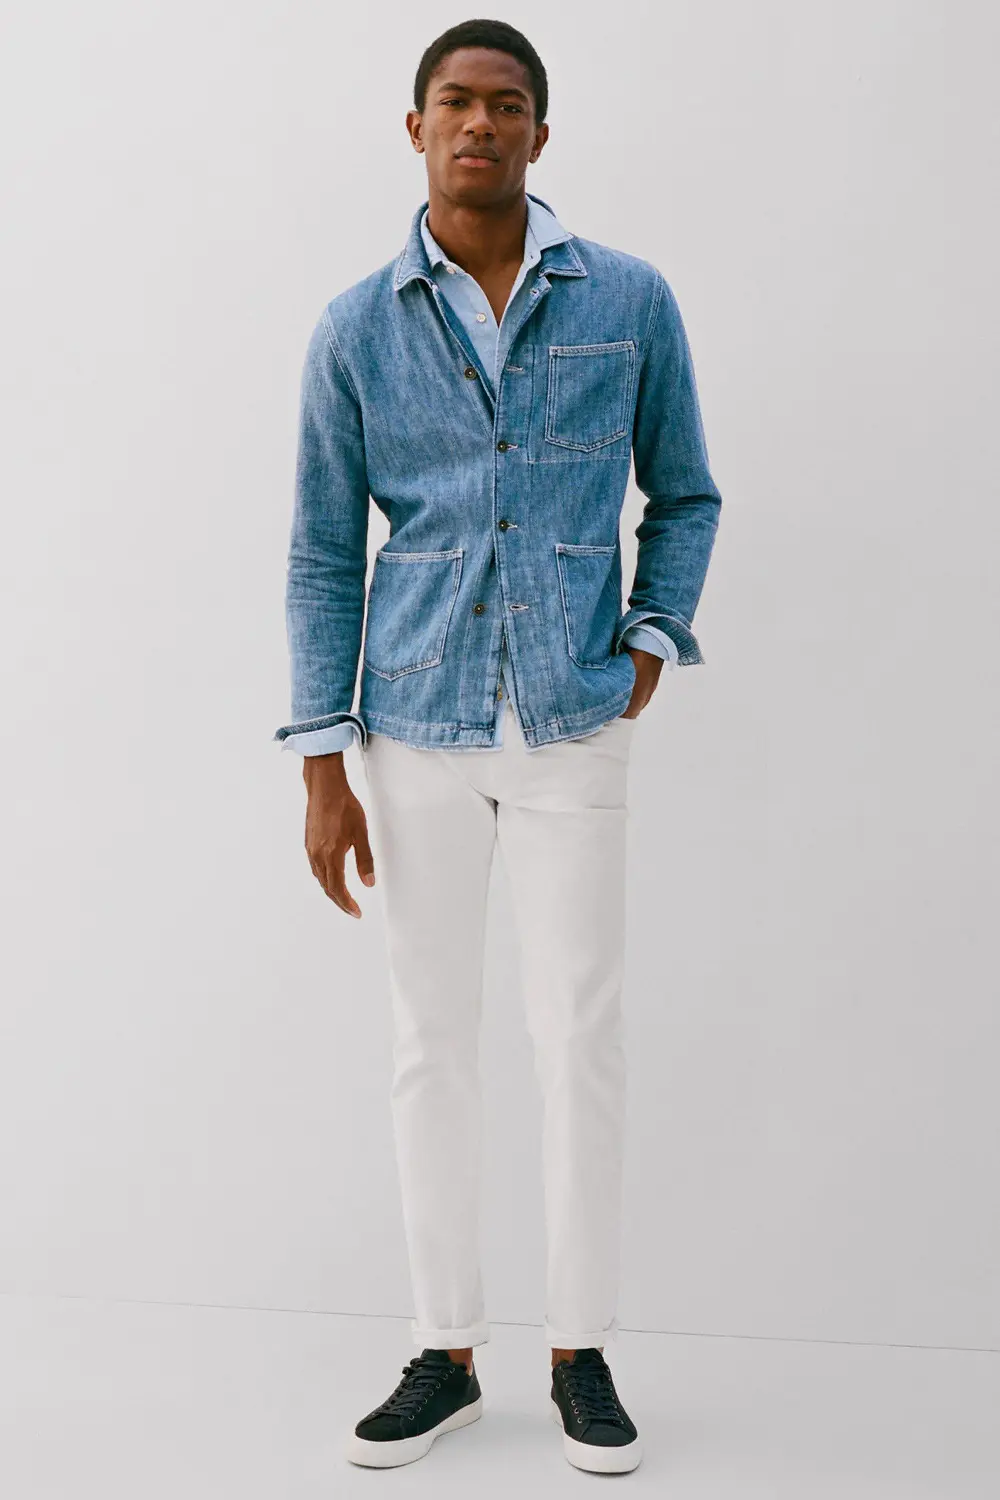 The Guy's Guide to White Pants in Fall and Winter  White jeans men, How to  wear white jeans, White pants men